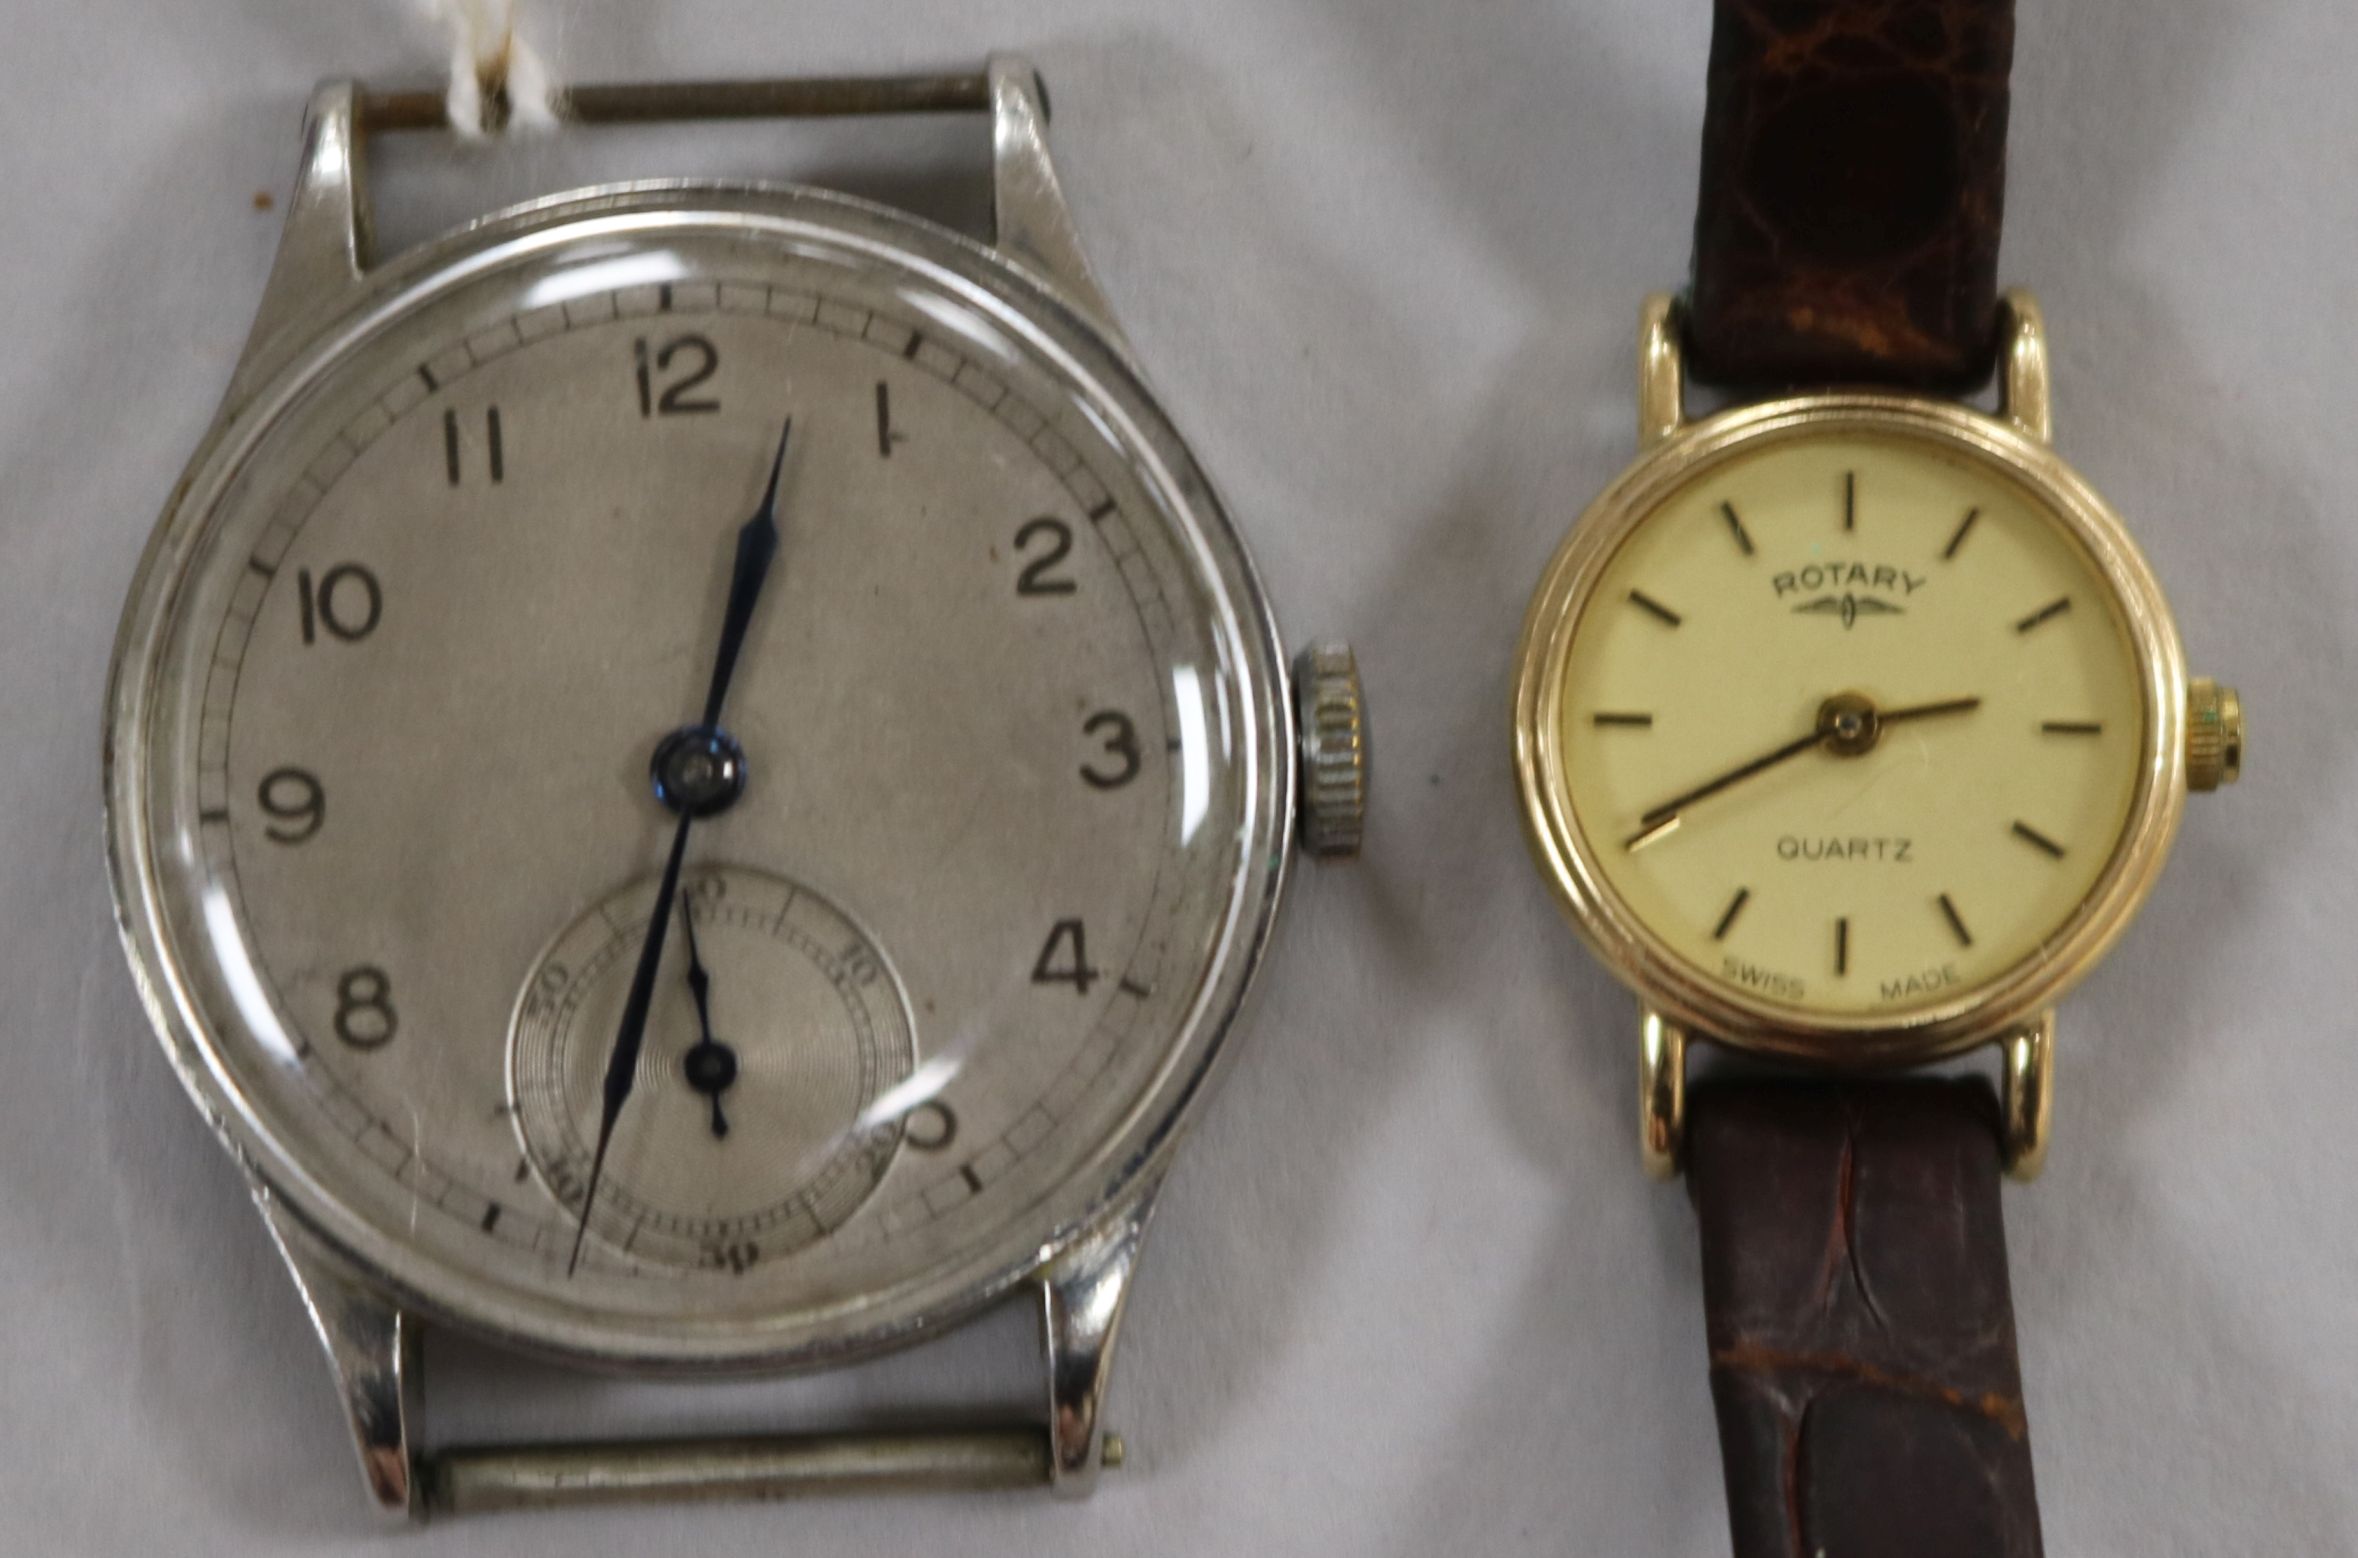 A gentleman's stainless steel Omega wristwatch, movement no. 8998523, c 1940 and a ladies' 9ct